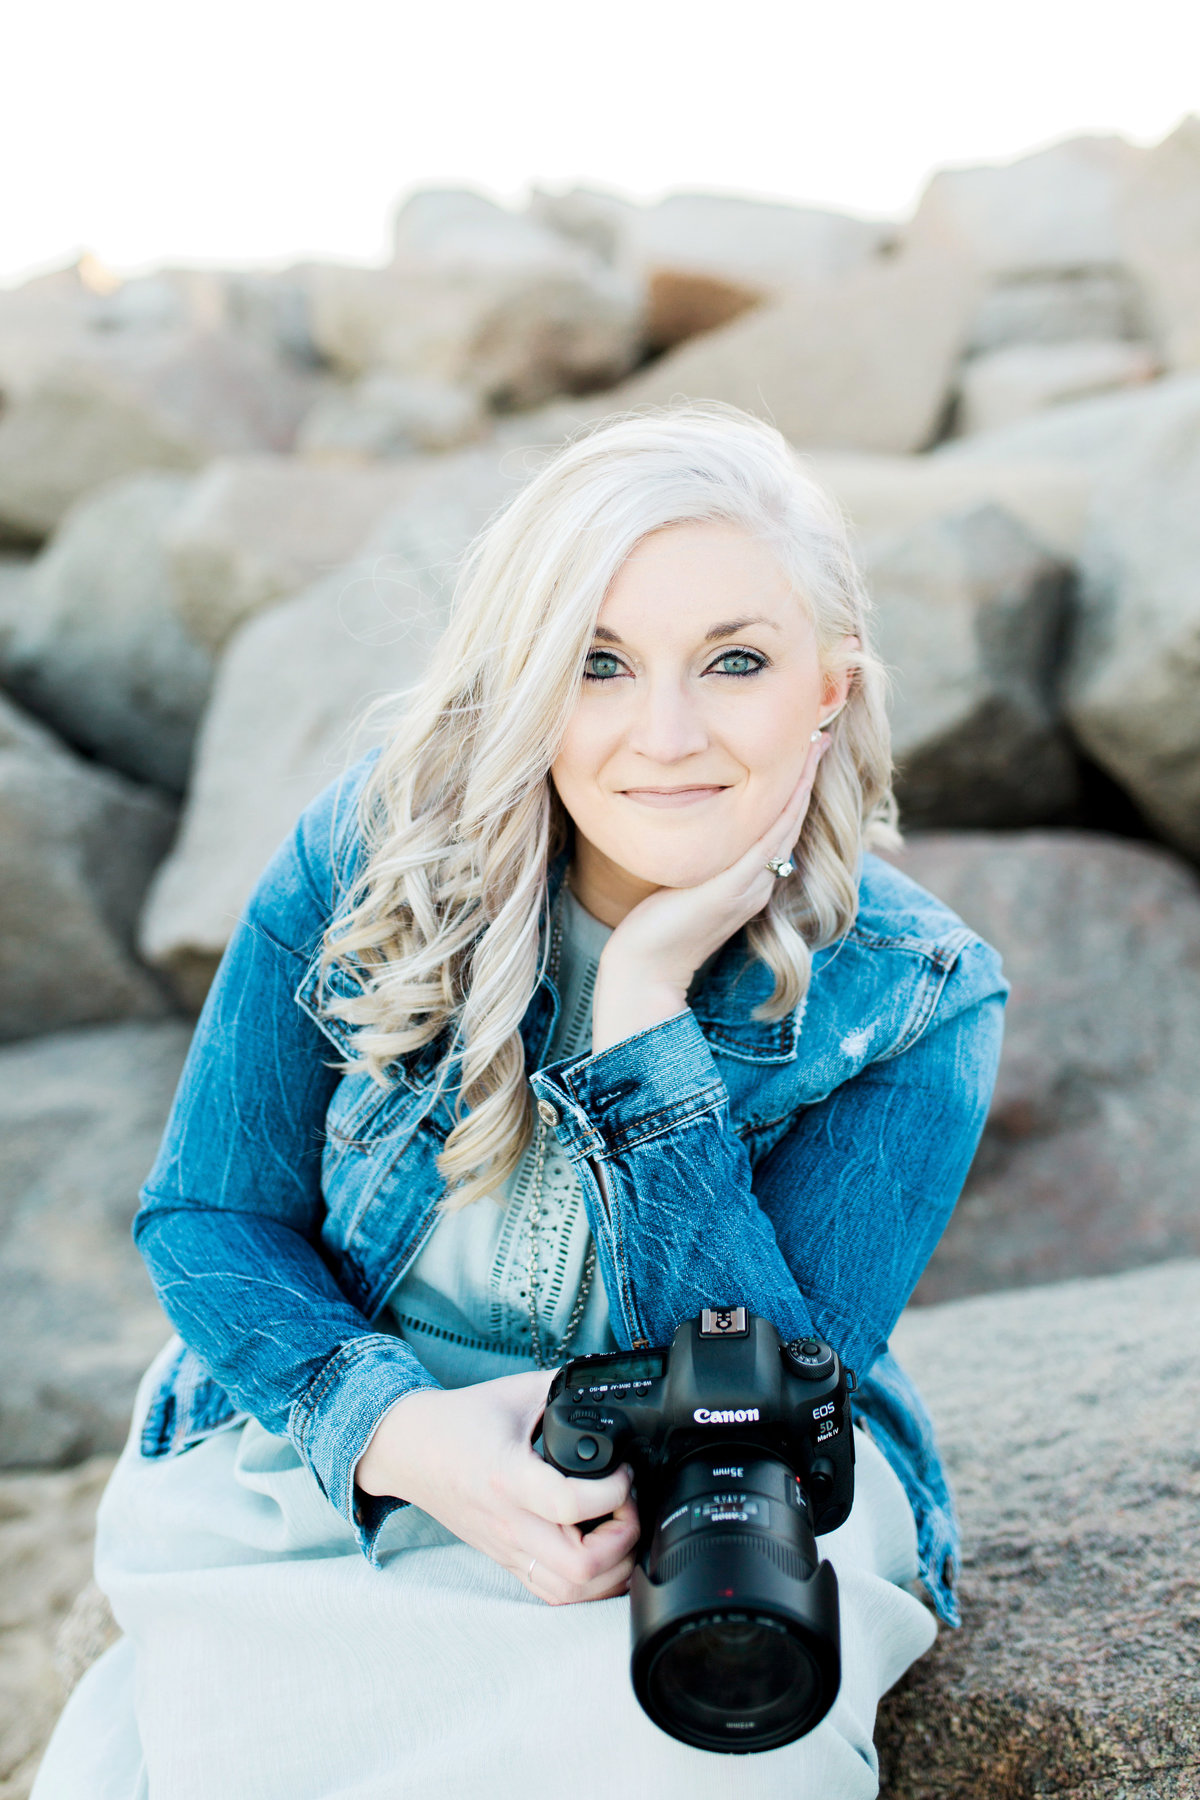 Here's Stephanie, the owner and founder of The Axtells Photo and Film.